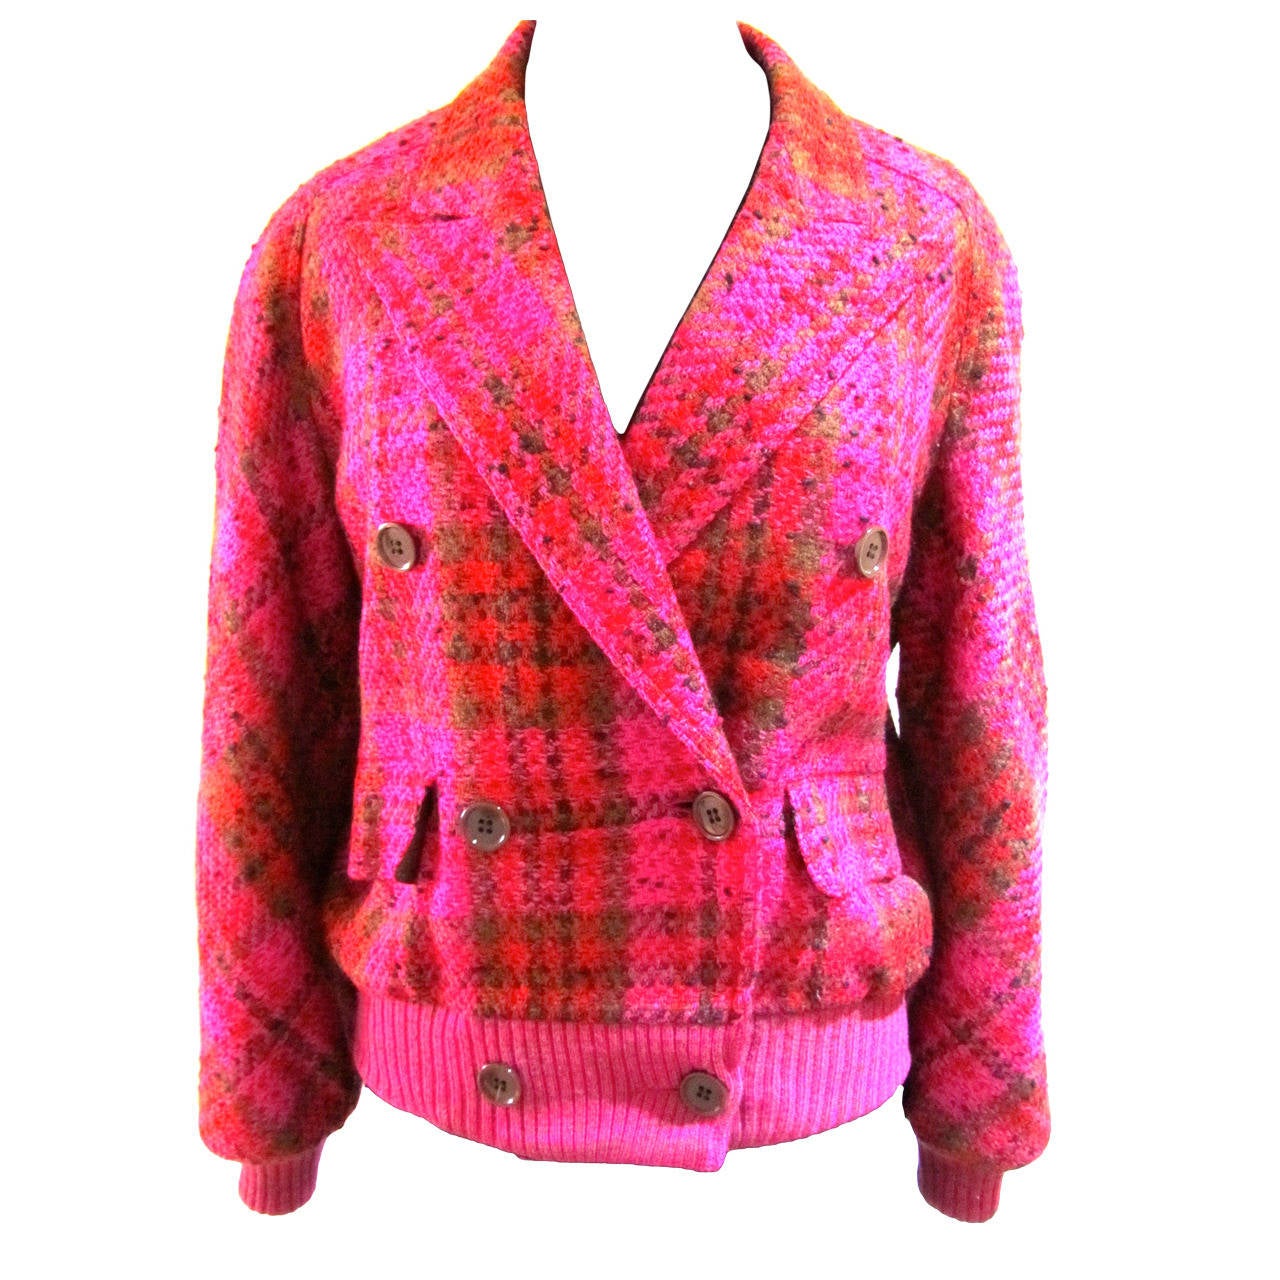 Valentino Double Breasted Jacket - Boucle Wool - Size 40